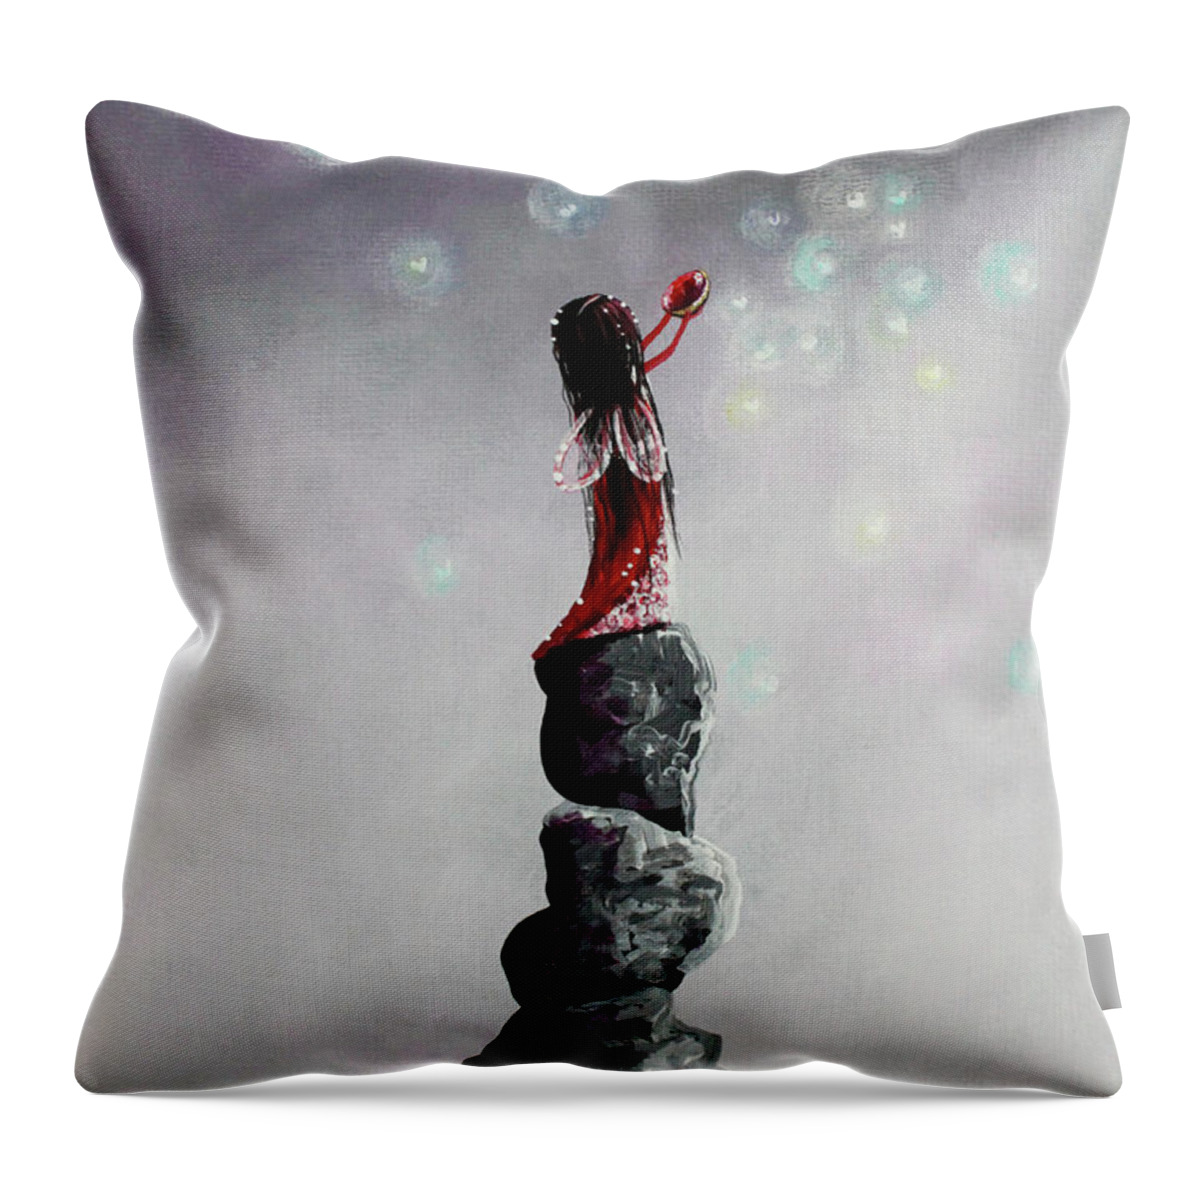 Fairy Throw Pillow featuring the painting Fairy Art Prints by Erback by Moonlight Art Parlour